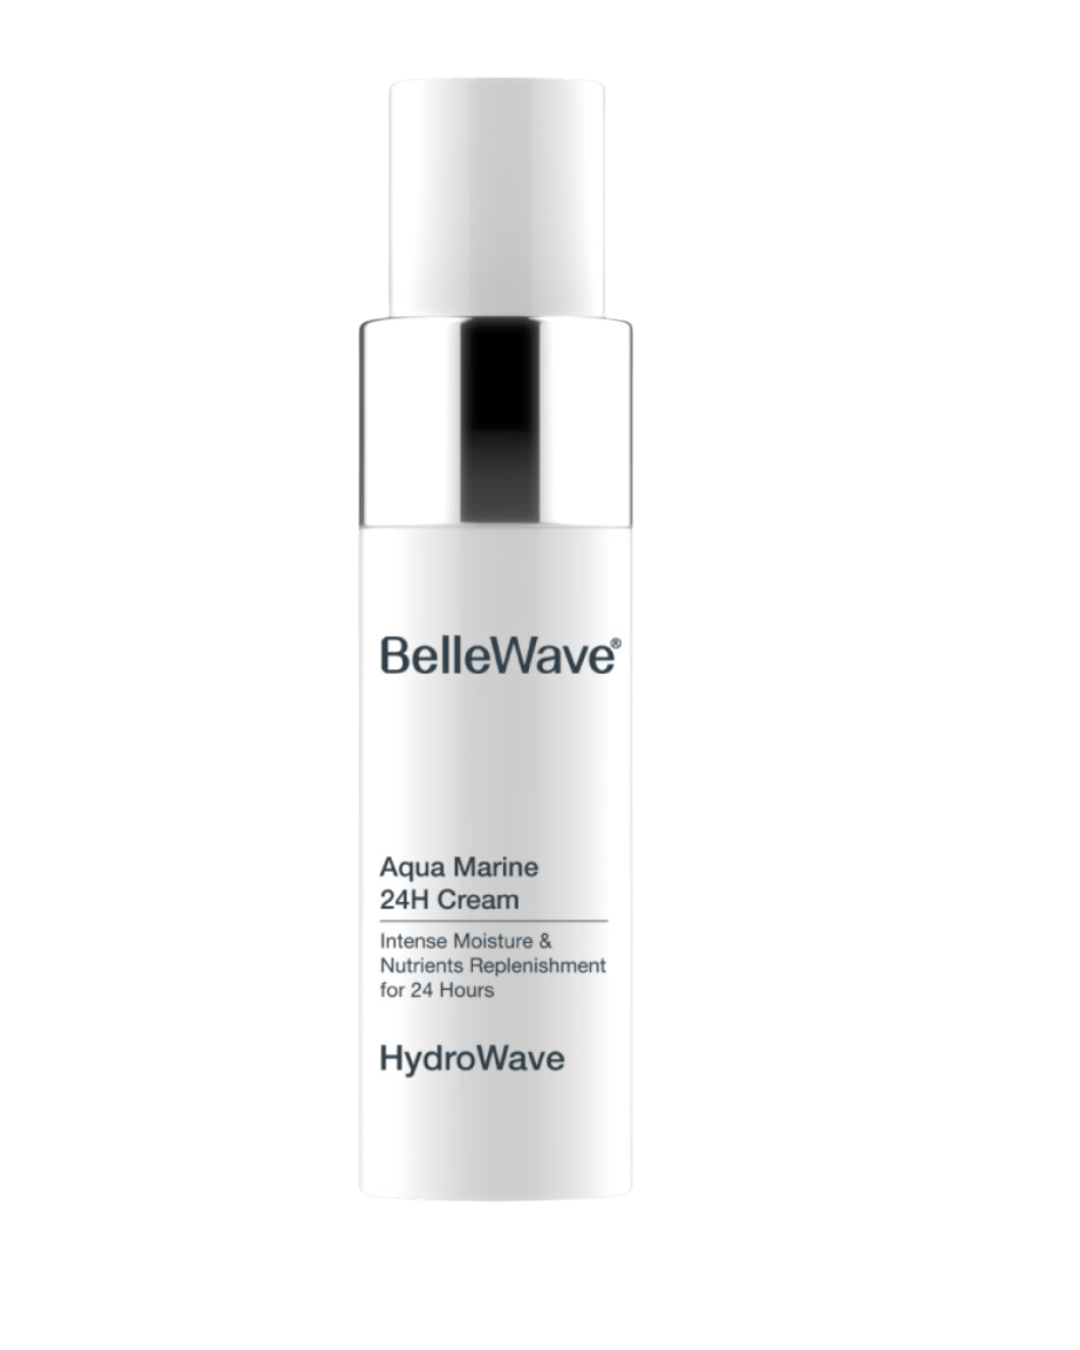 Daily Vanity Beauty Awards 2024 Best Skincare BelleWave Aqua Marine 24H Cream Voted By Beauty Experts